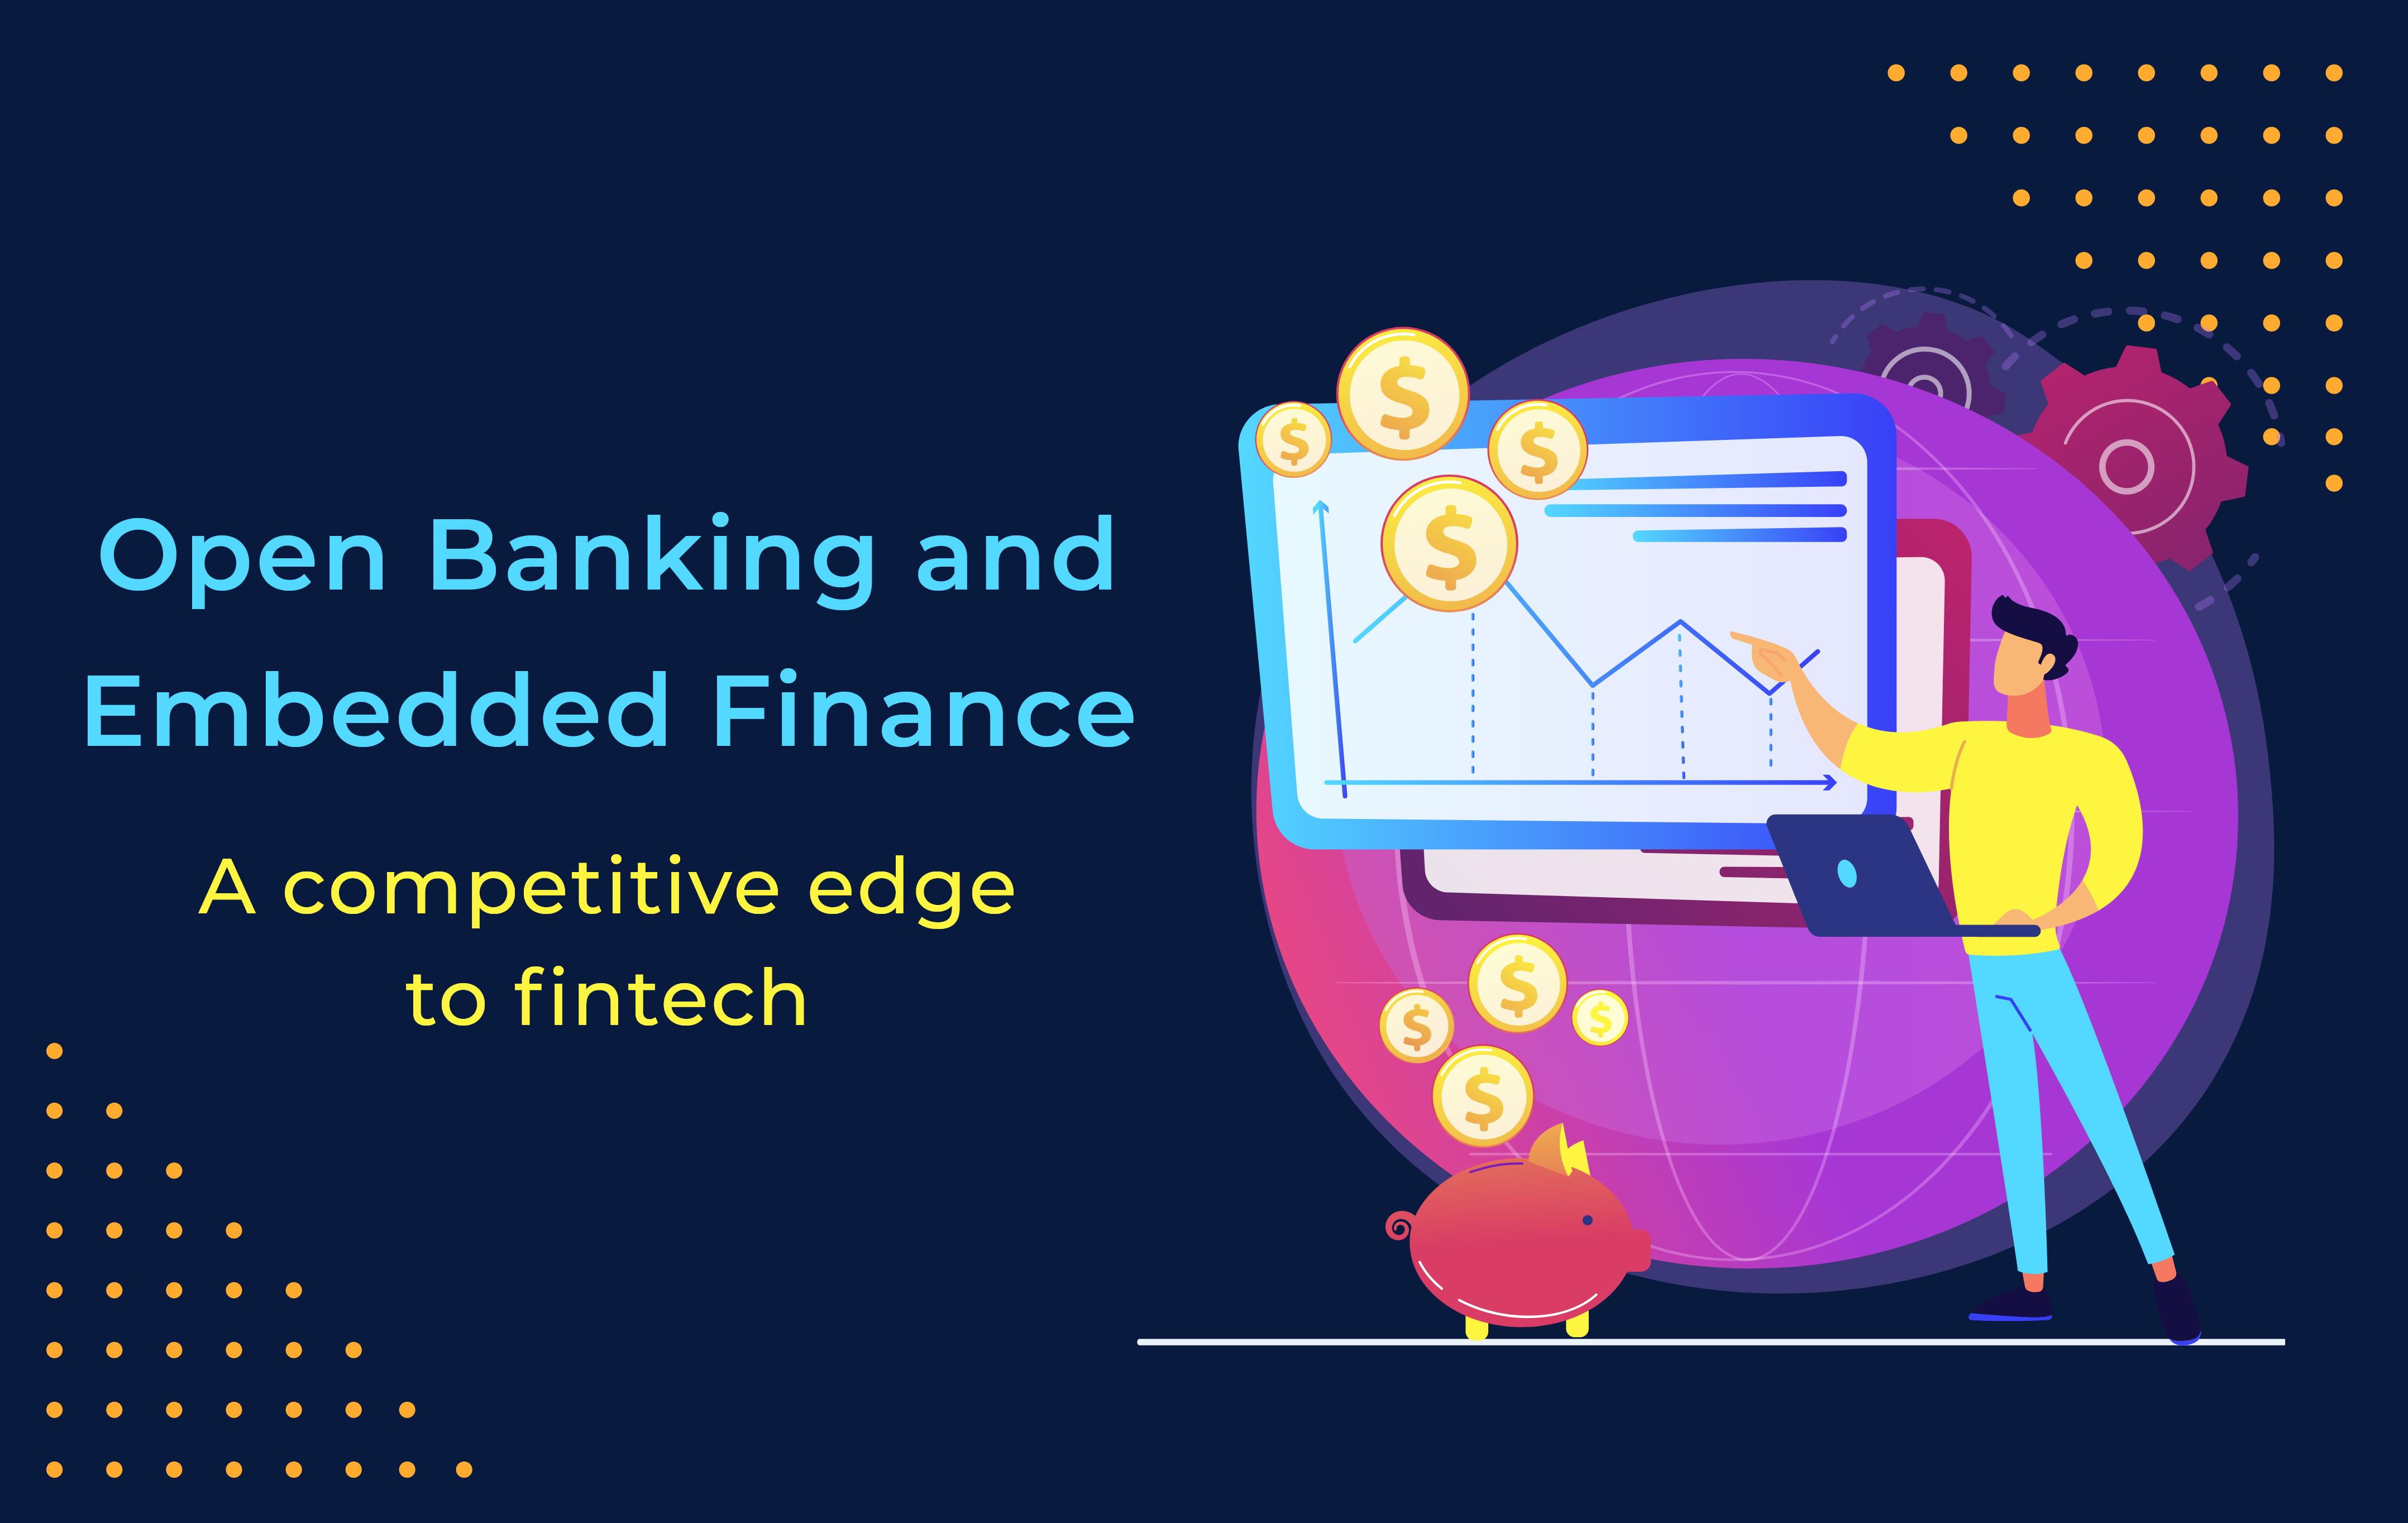 Open Banking and Embedded Finance for Financial Inclusion